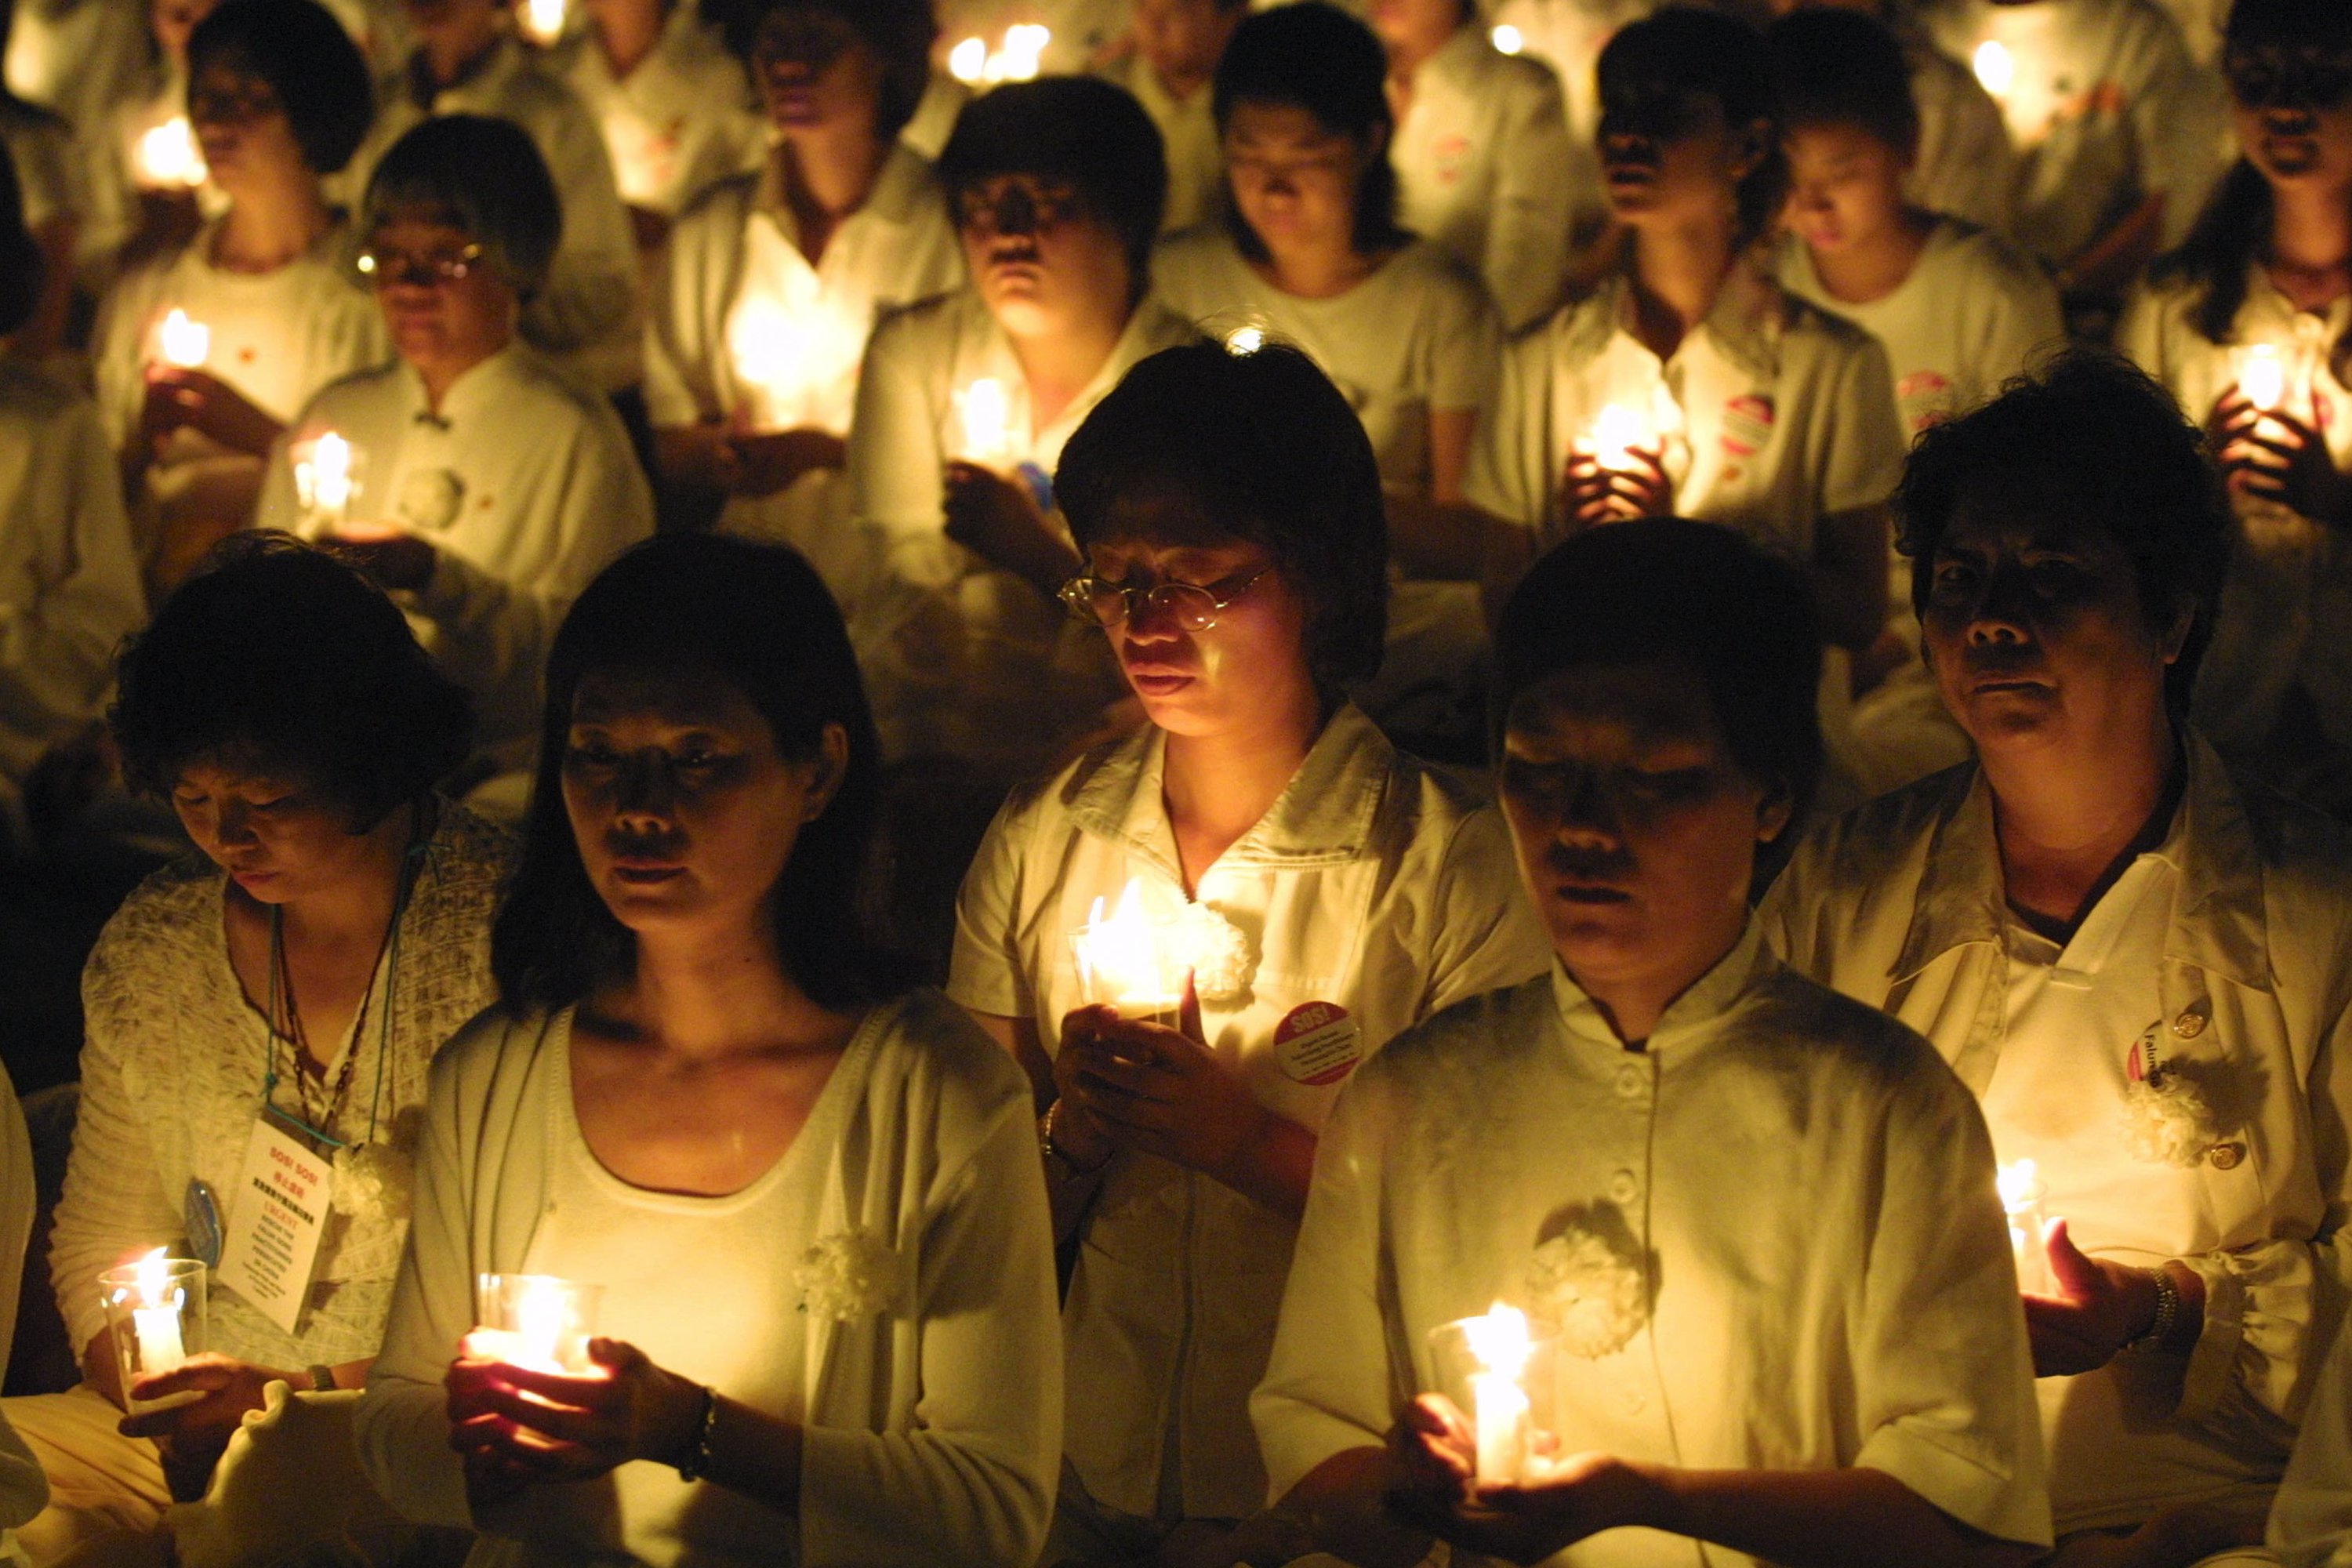 Members of the Falun Gong spiritual movement hold candles during a candlelight vigil July 19, 2001 in Washington, DC